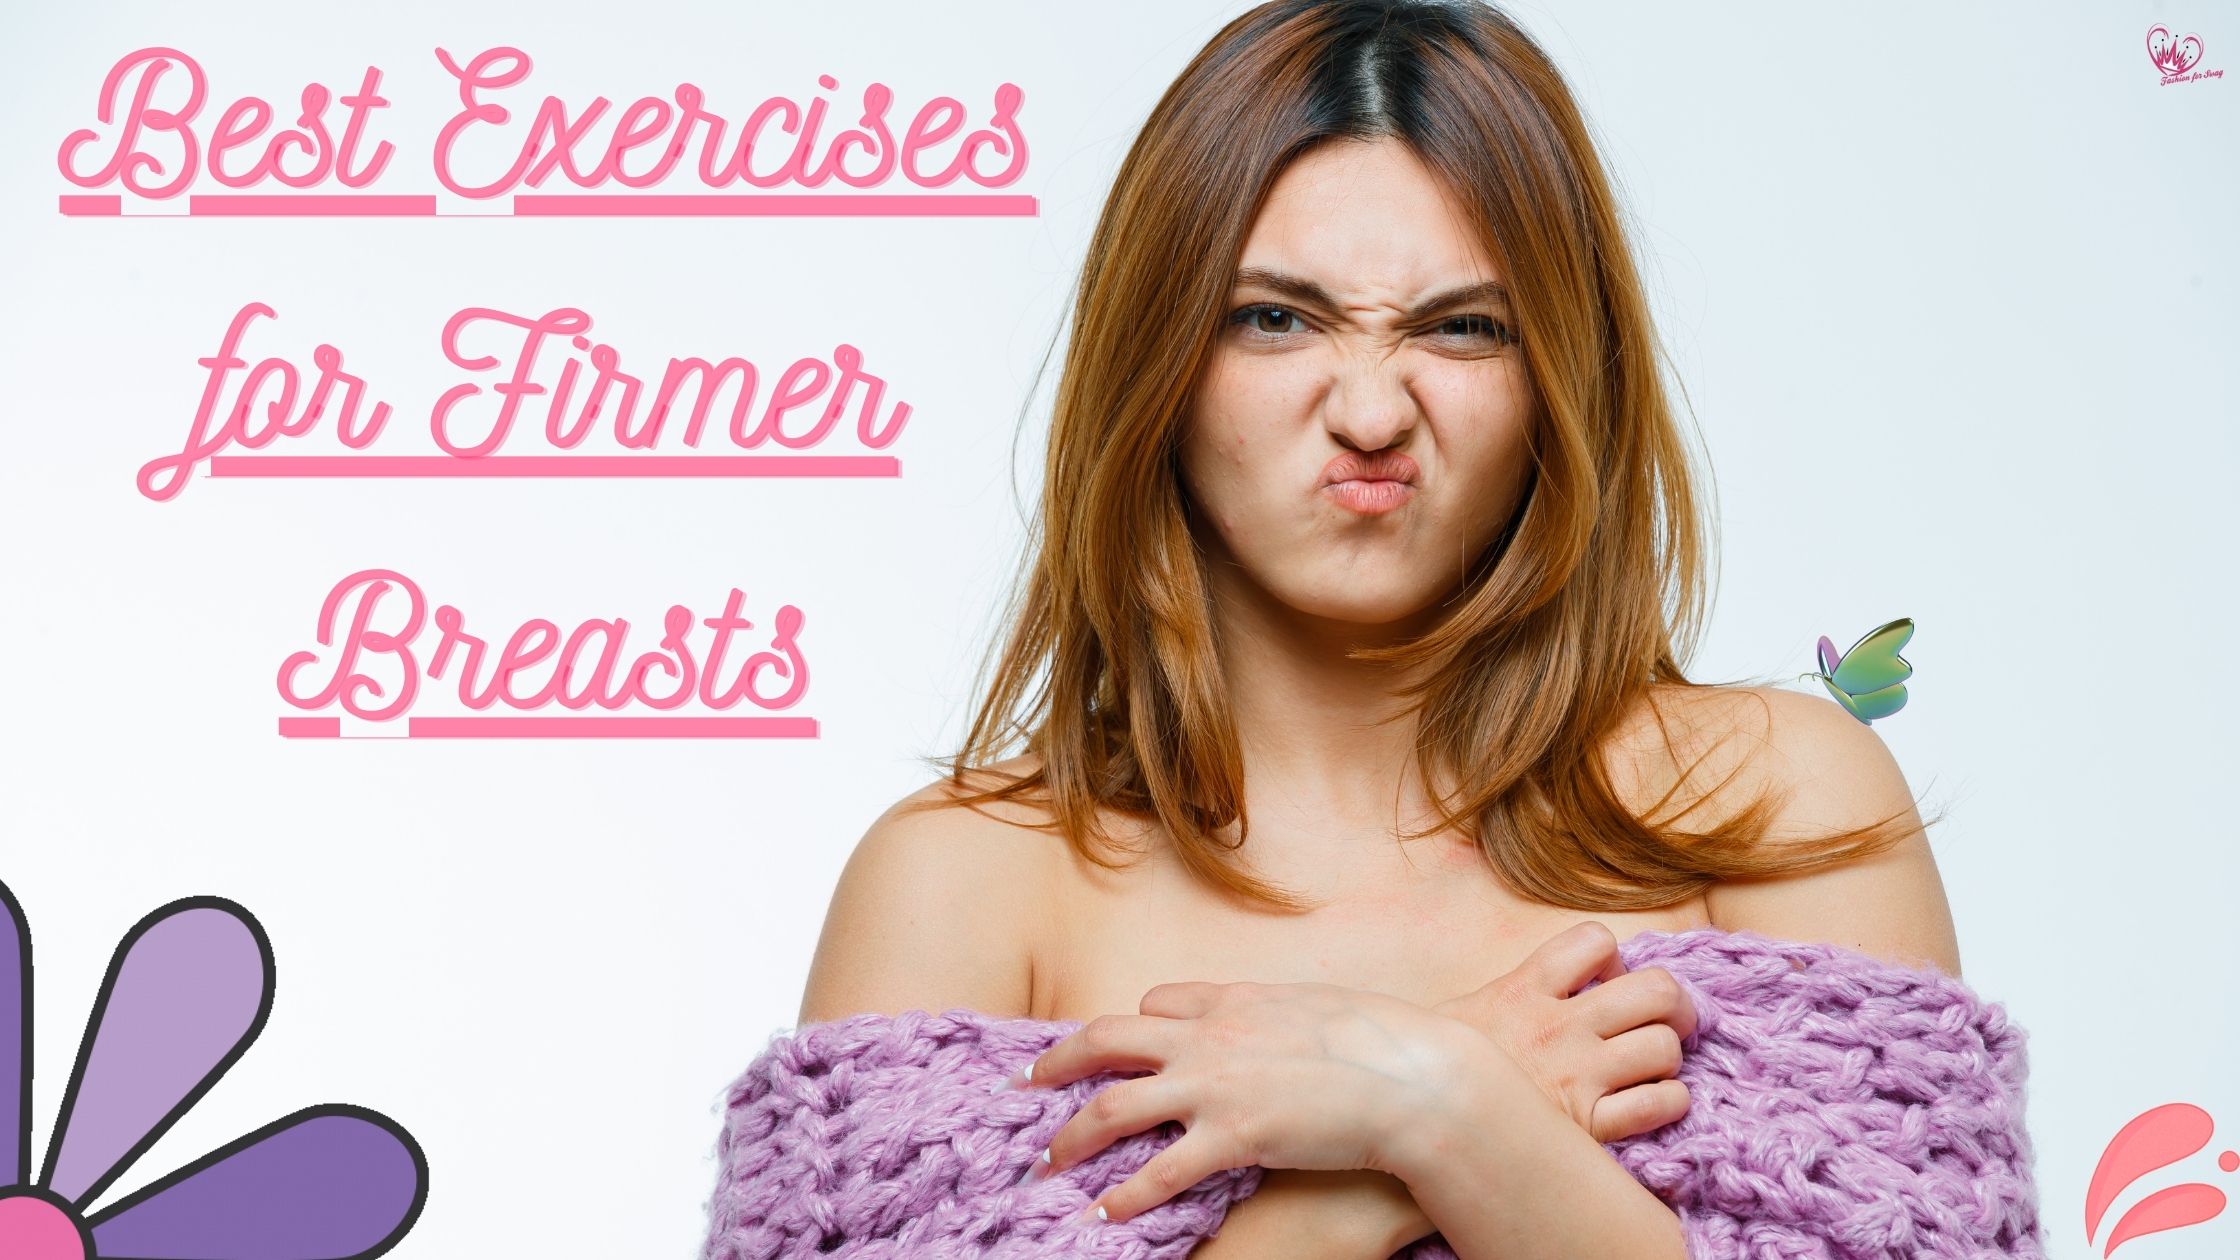 Best Exercises for Firmer Breasts: Strengthening Your Pectoral Muscles